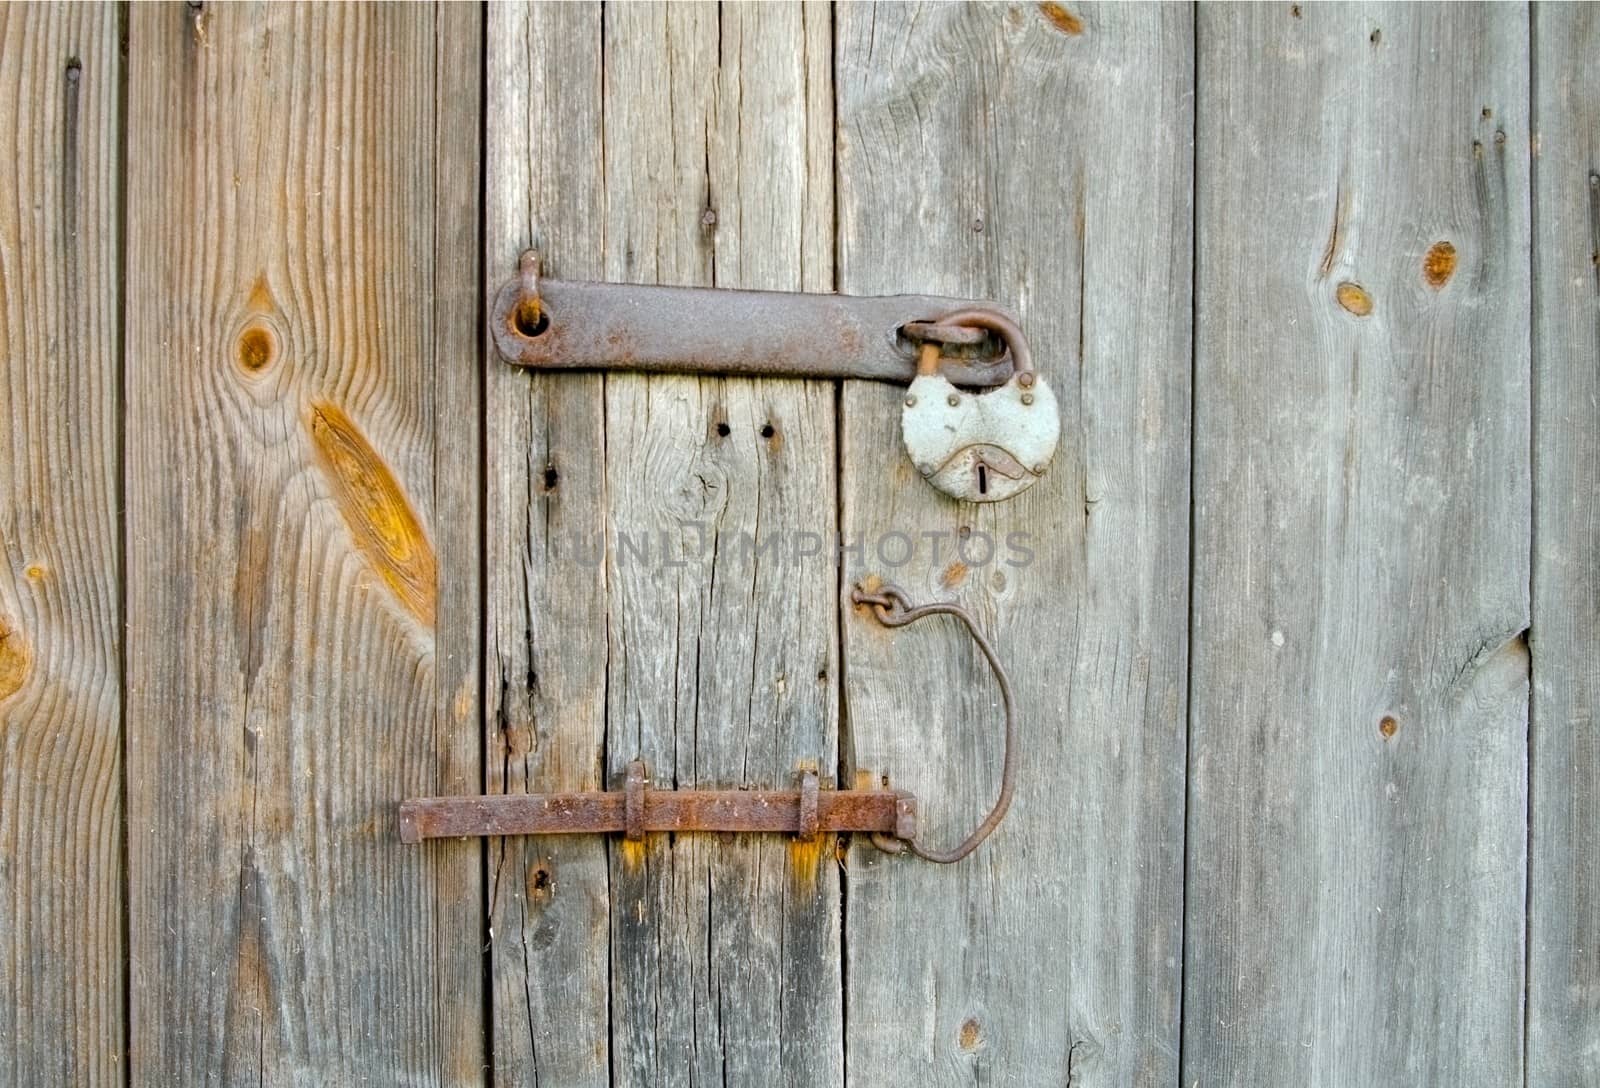 Wooden door with a rusty bolt and padlock by Stabivalen